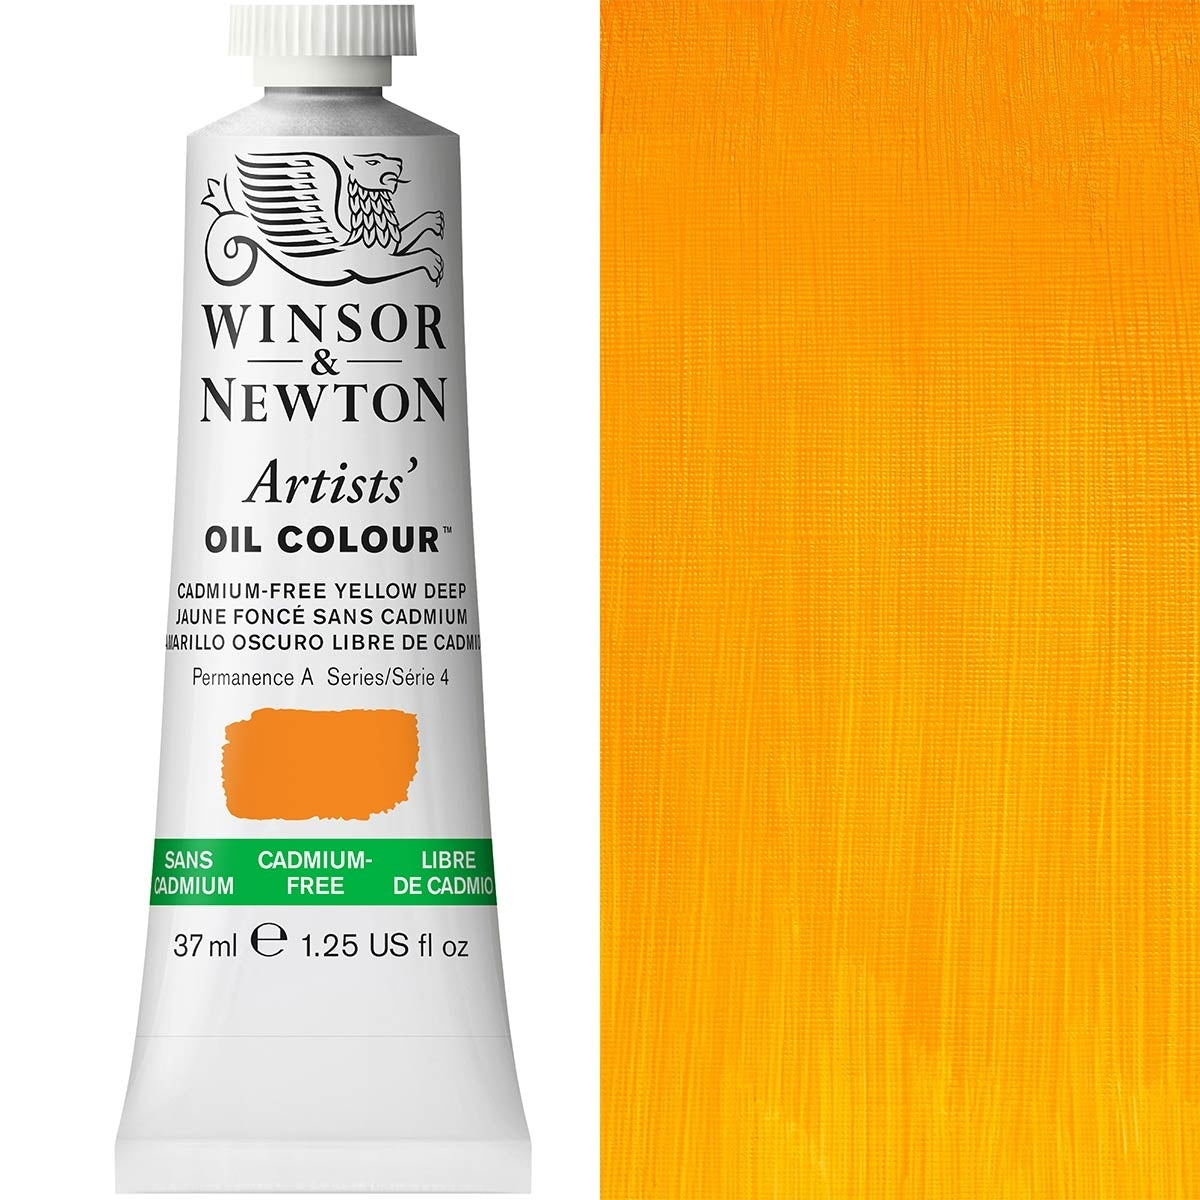 Winsor and Newton - Artists' Oil Colour - 37ml - Cad Free Yellow Deep